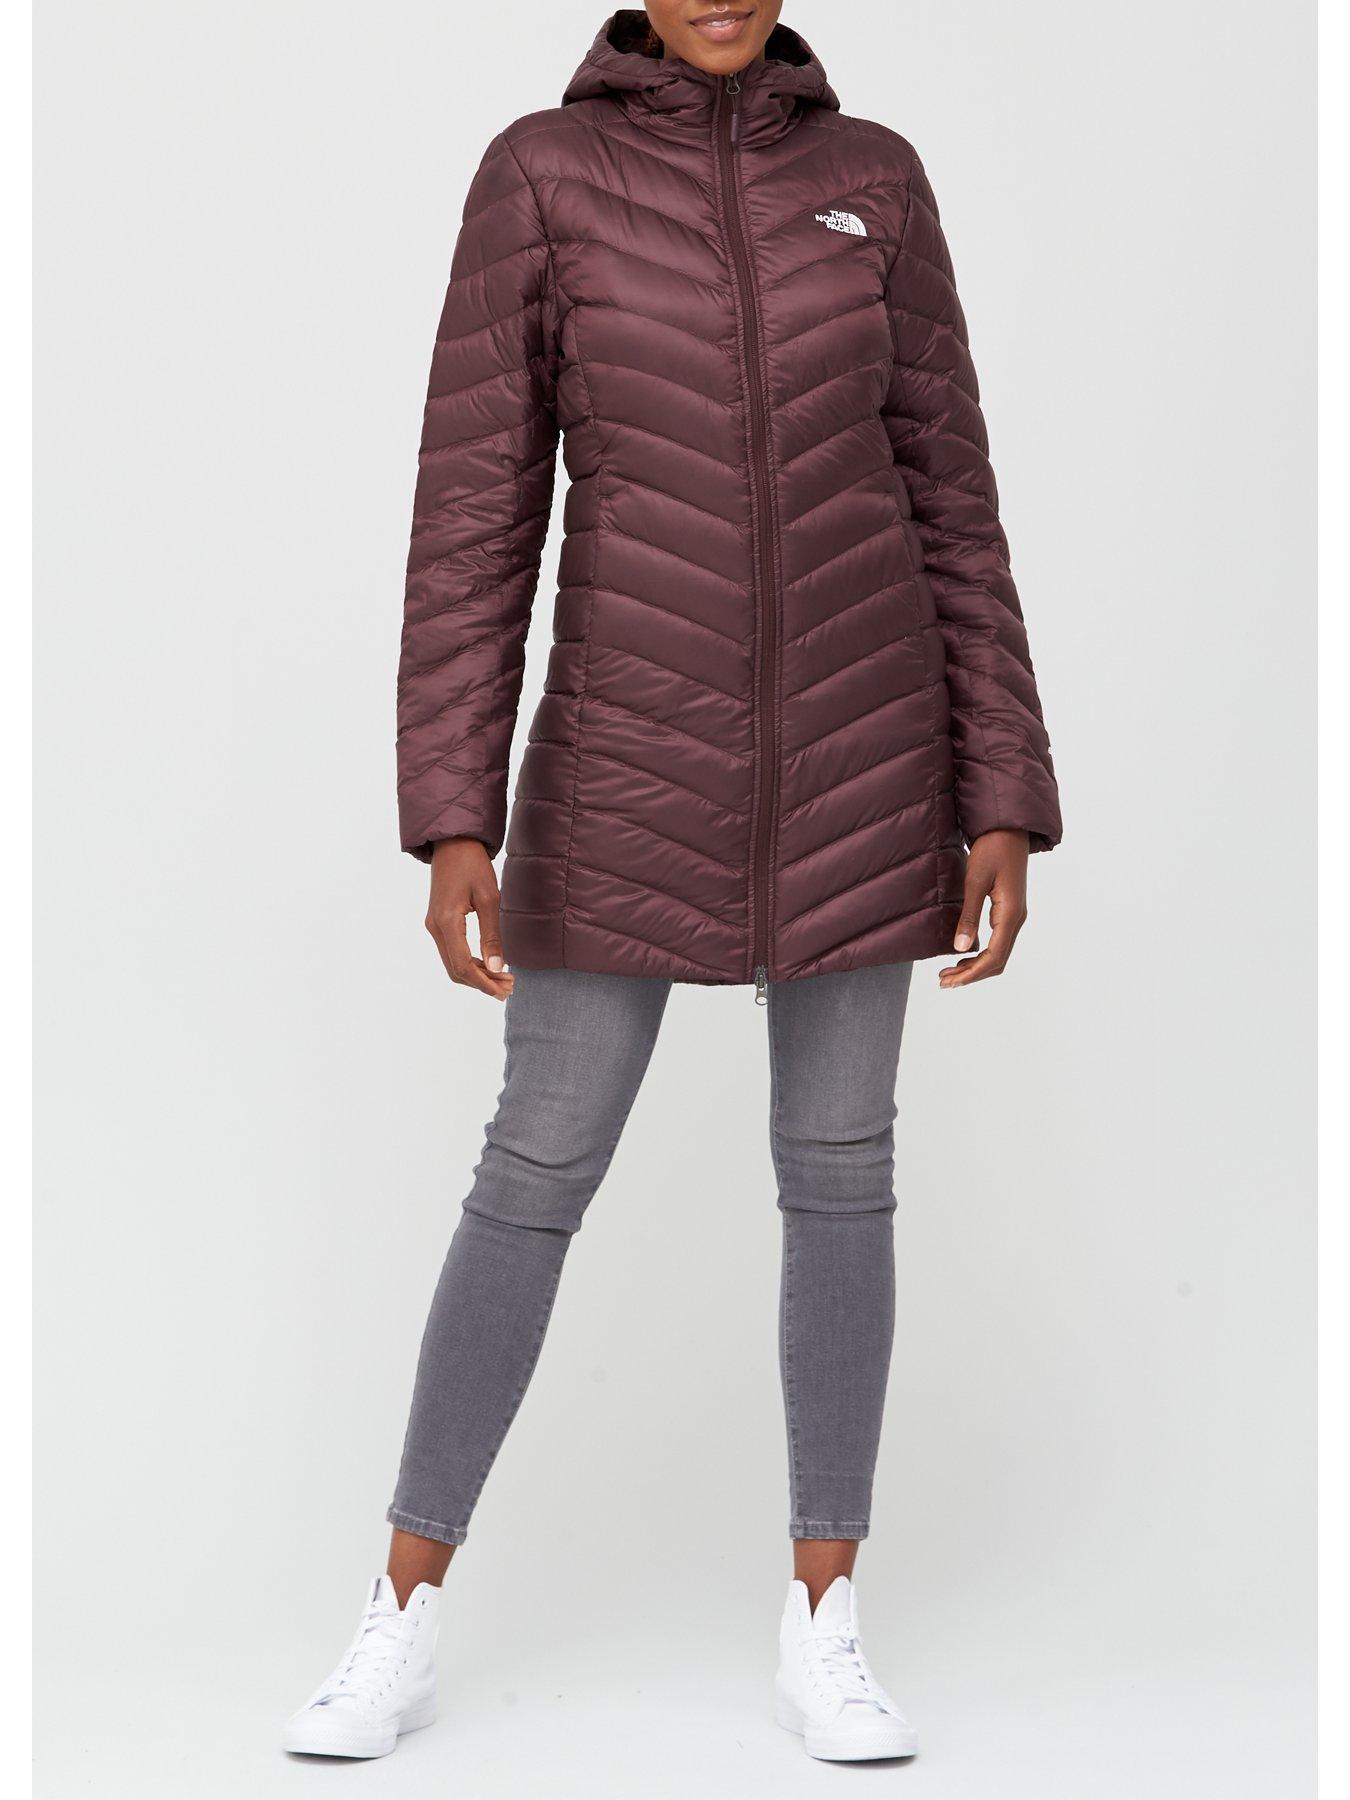 north face sale womens uk